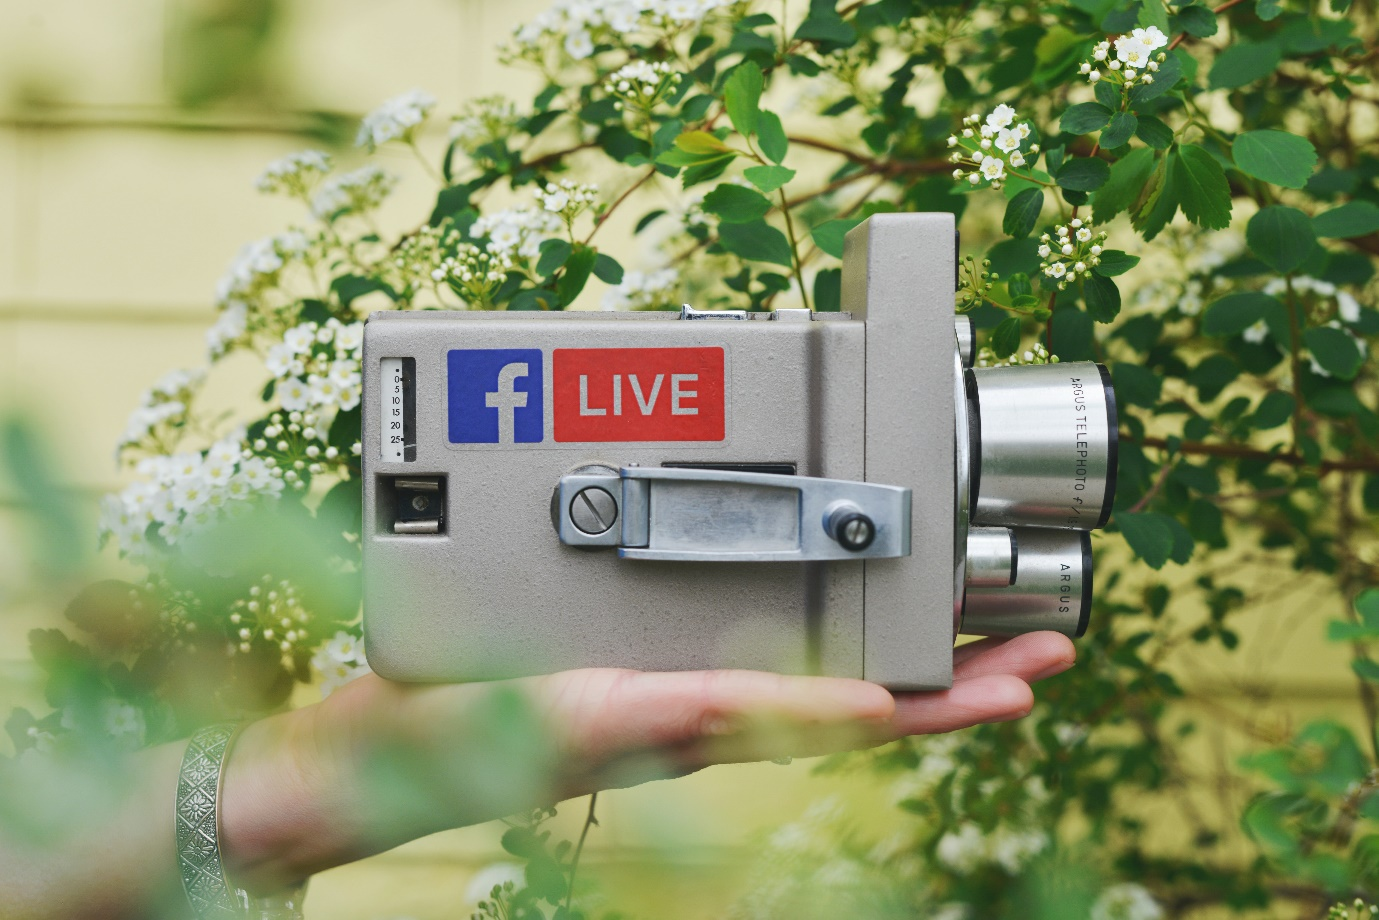 Live Streaming Facebook